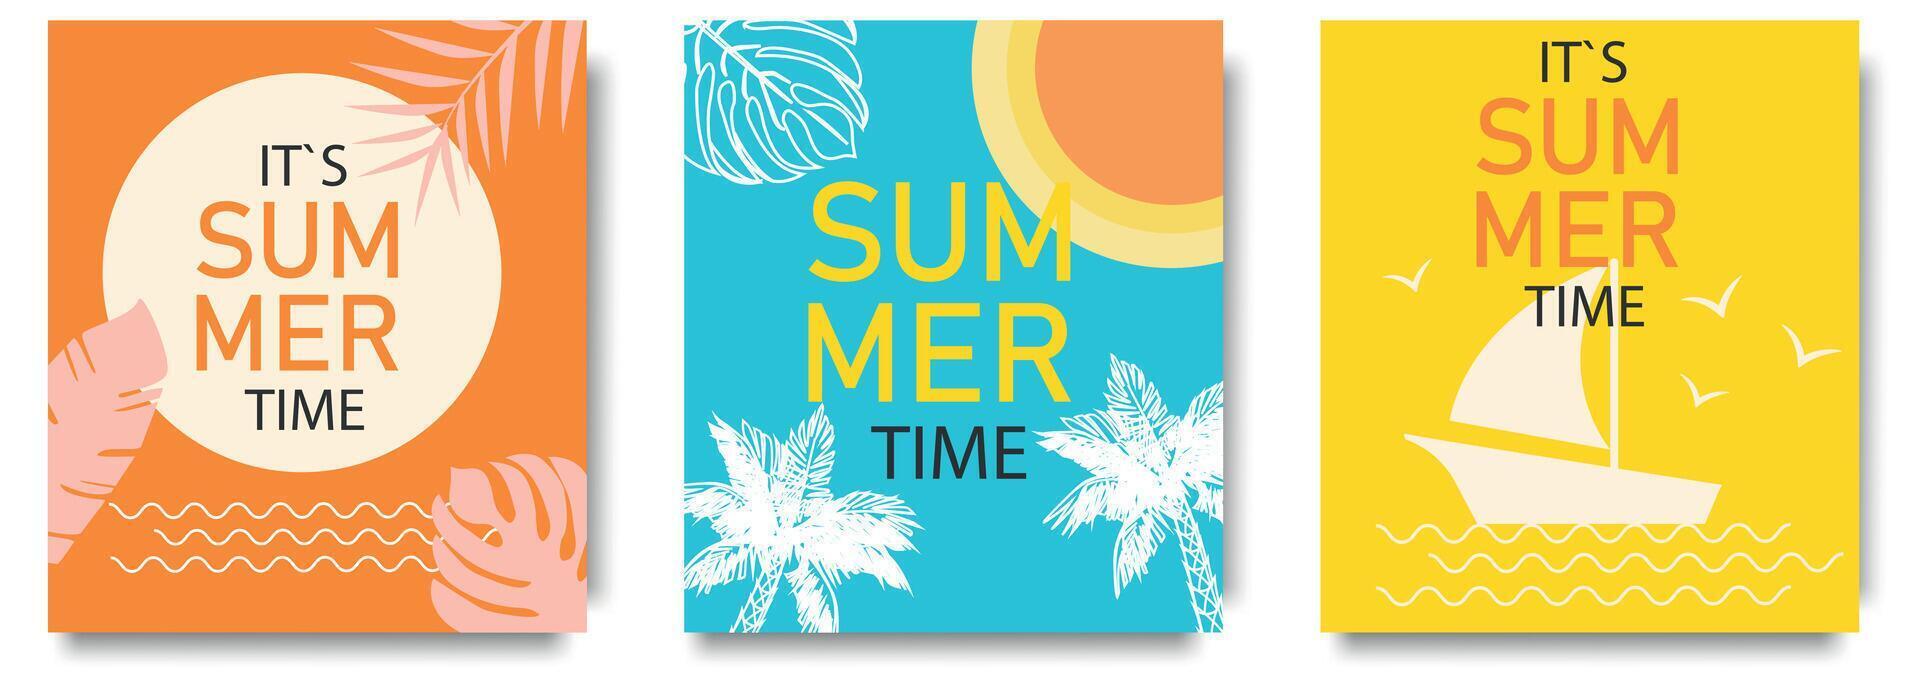 Creative concept of summer bright and juicy background. Modern abstract art design with palm, tropical leafs and overlay effect. Templates for celebration, ads, branding, banner, cover, label, poster vector